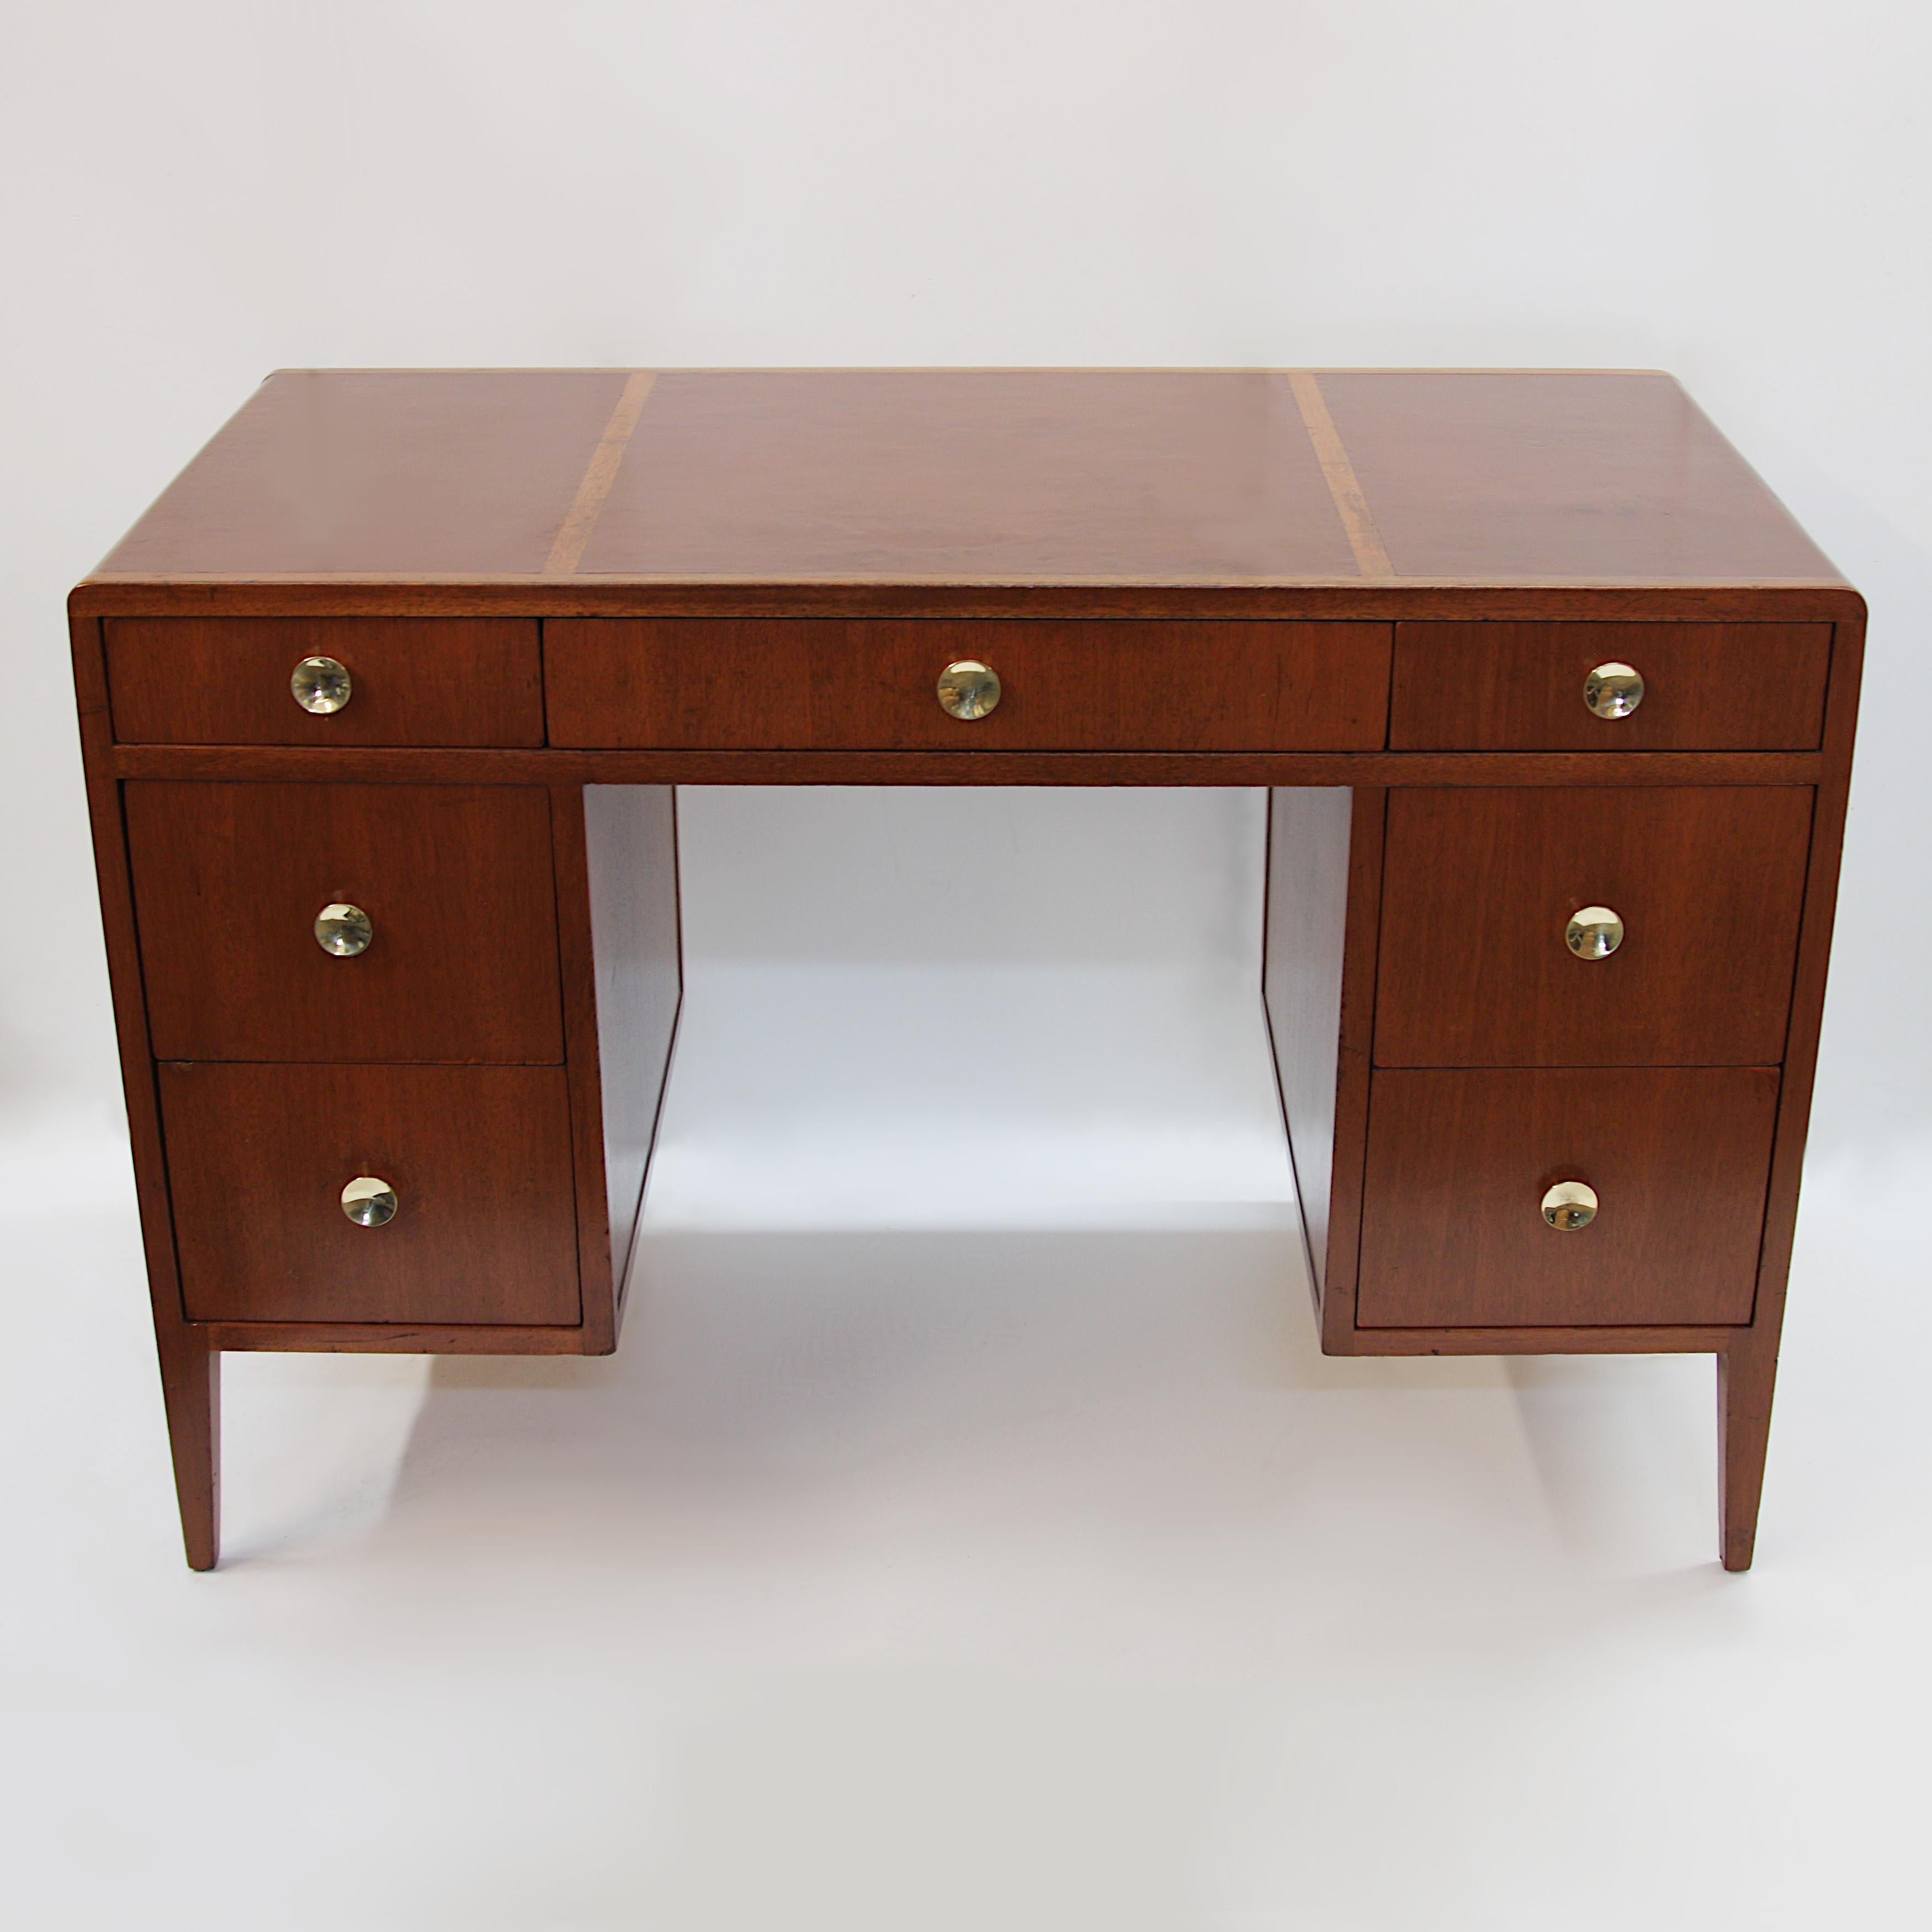 North American Mid-Century Modern Kneehole Leather-Top Desk by Edward Wormley for Dunbar